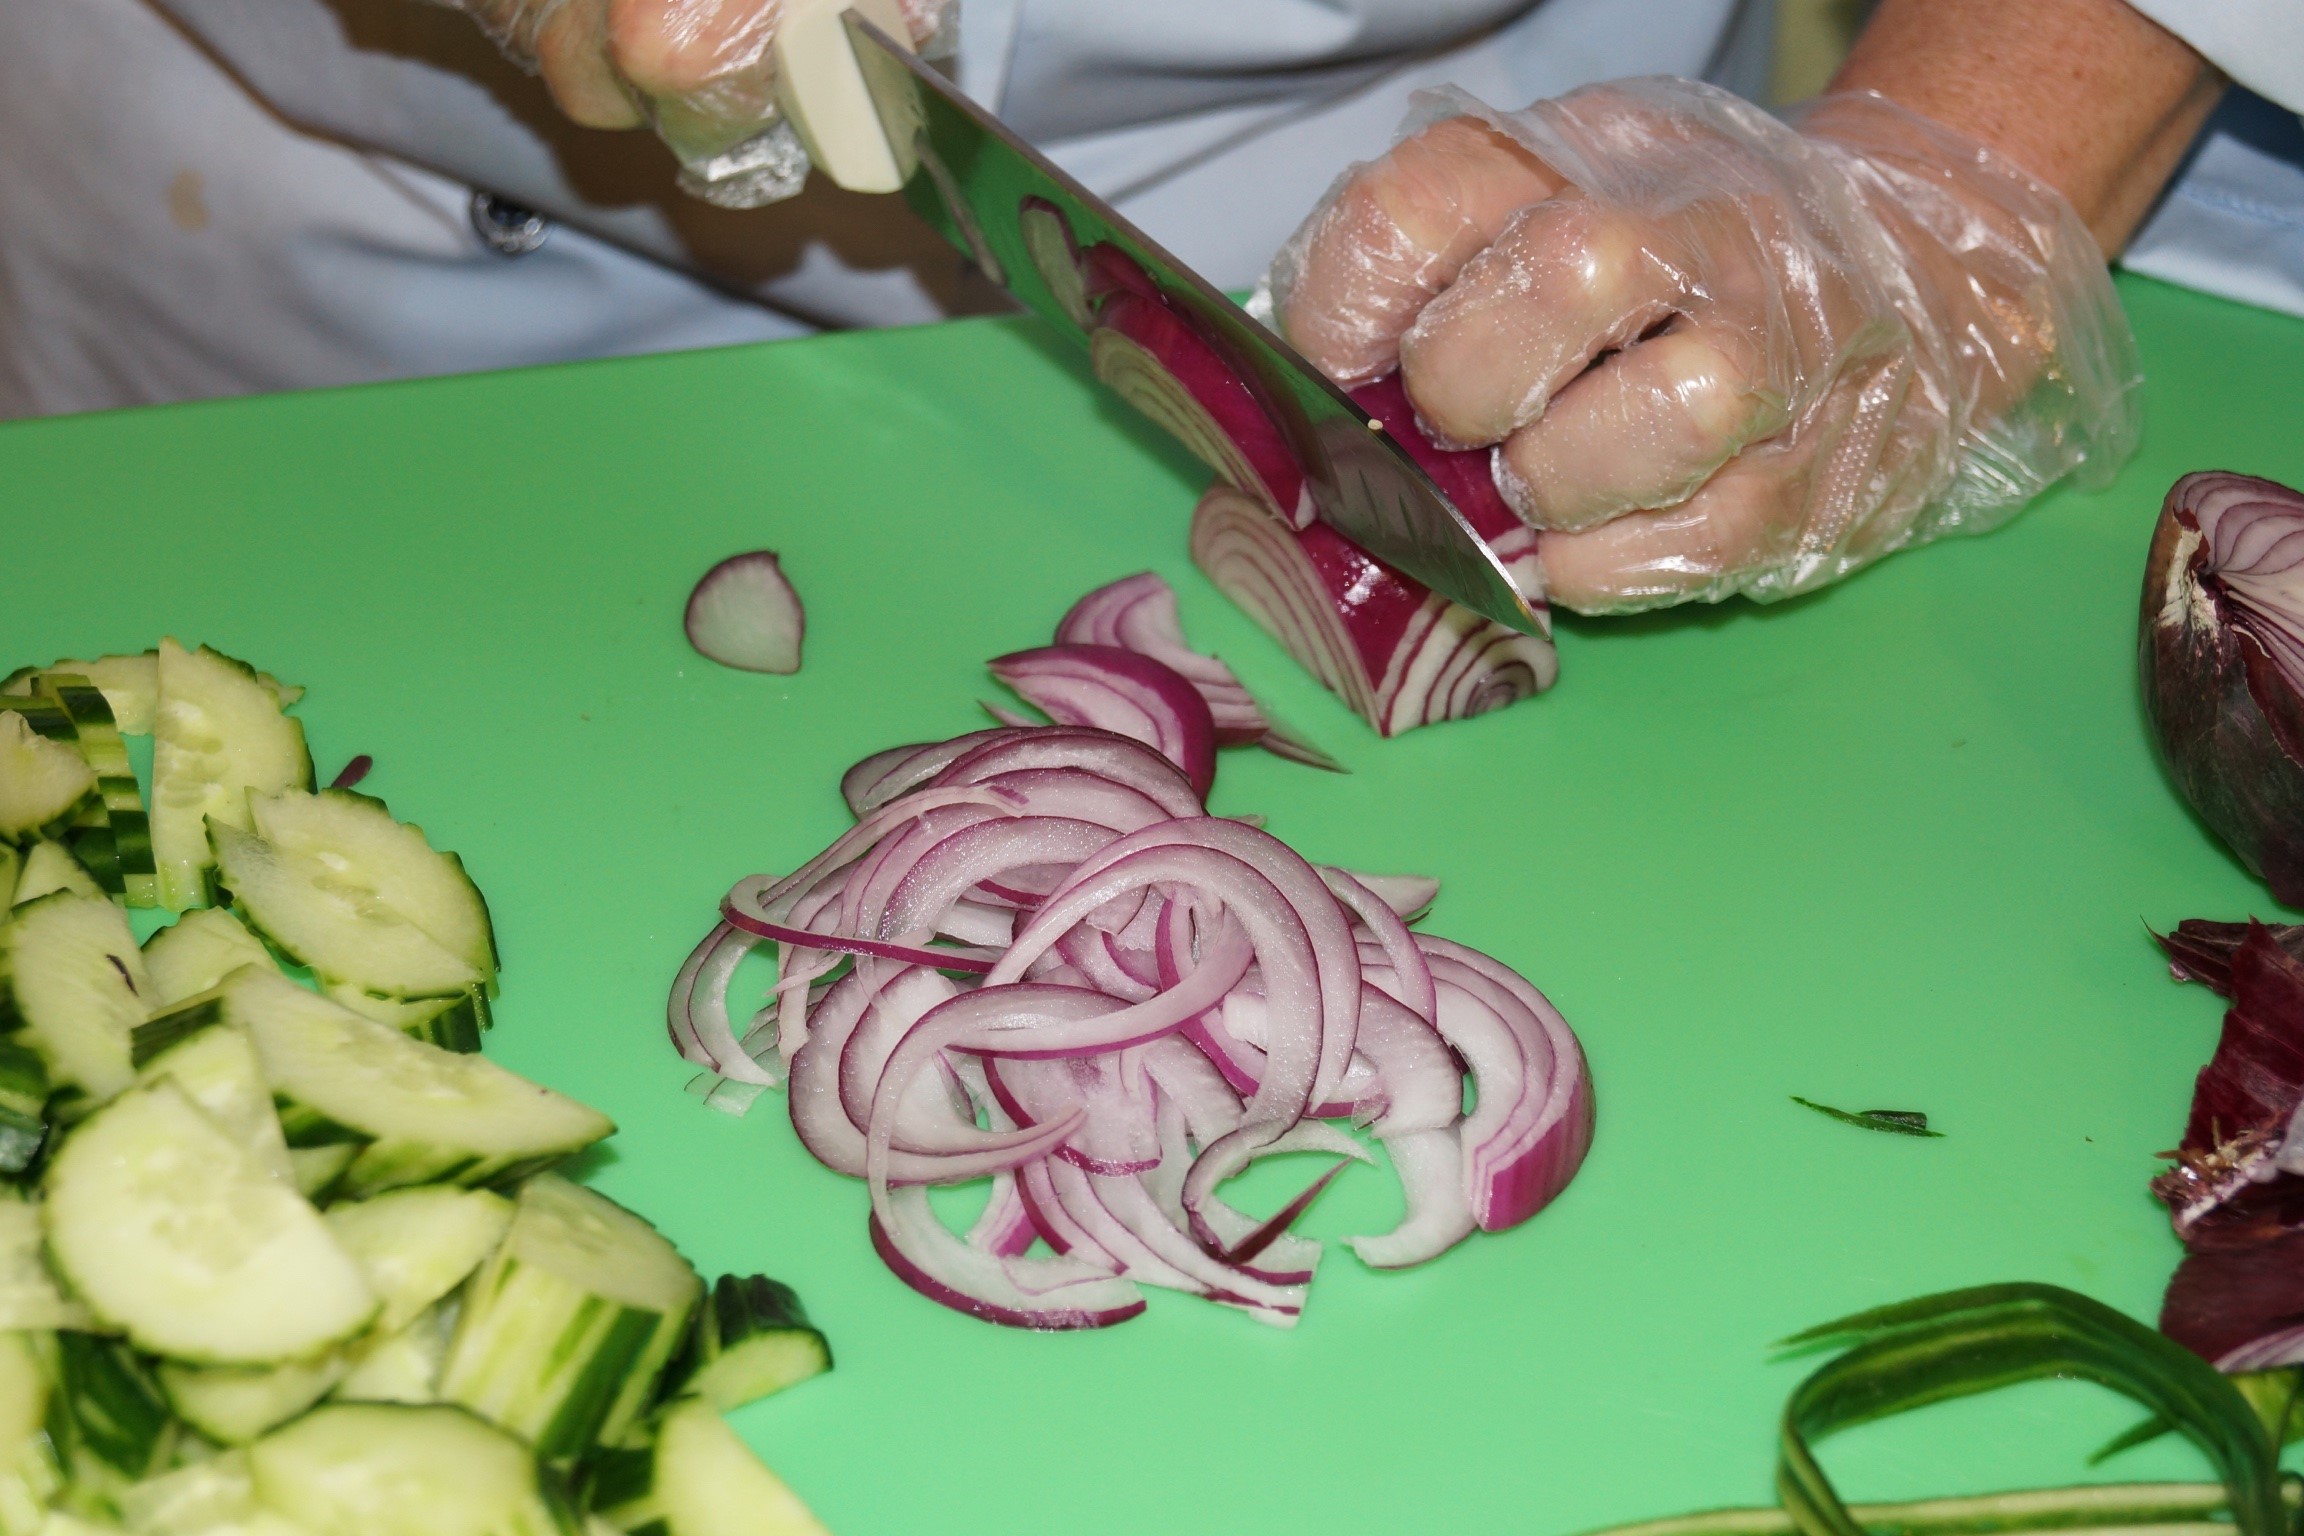 Photo of a person with gloves, cutting red onion on a green cutting board.